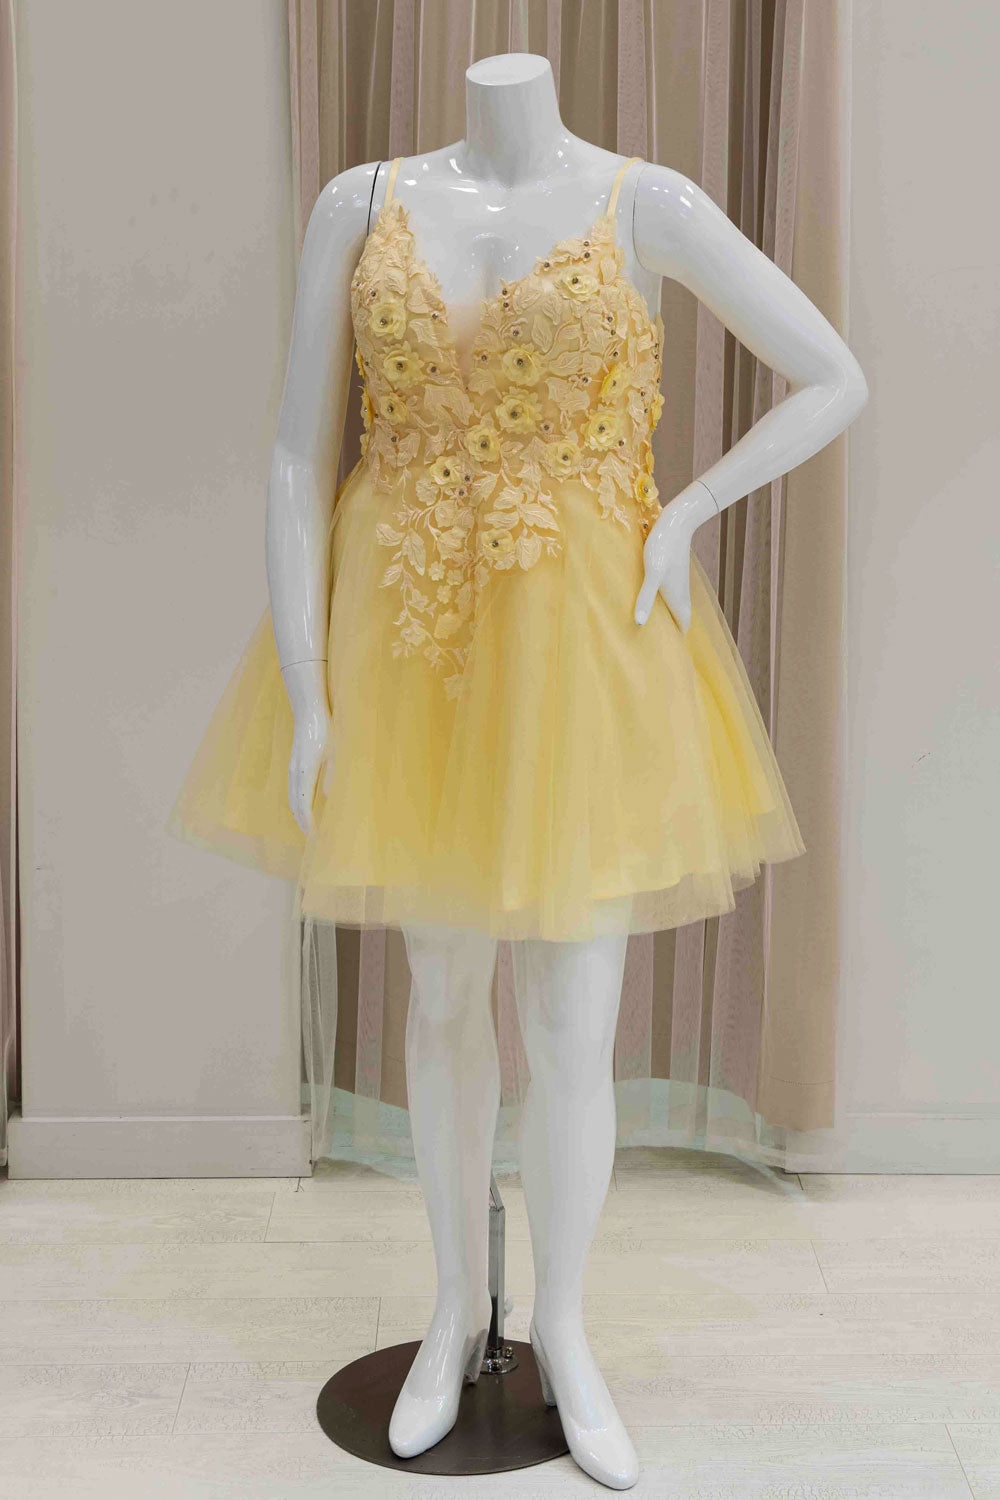 Short Formal Dress for 8th Grade Dance in Yellow